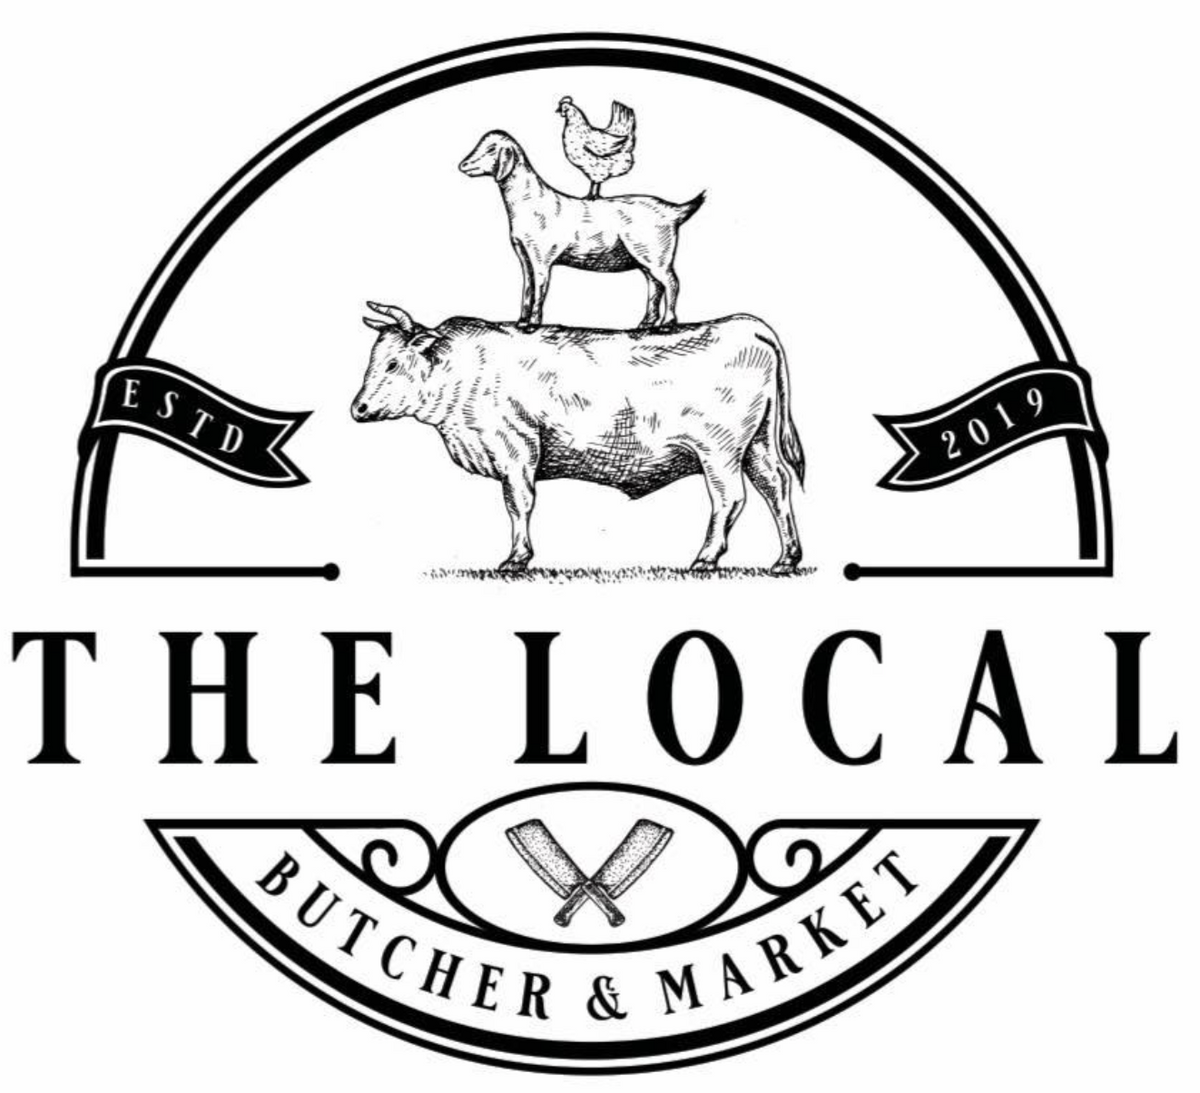 Episode 23 - Going From Dream to Reality with The Local, Butcher & Market